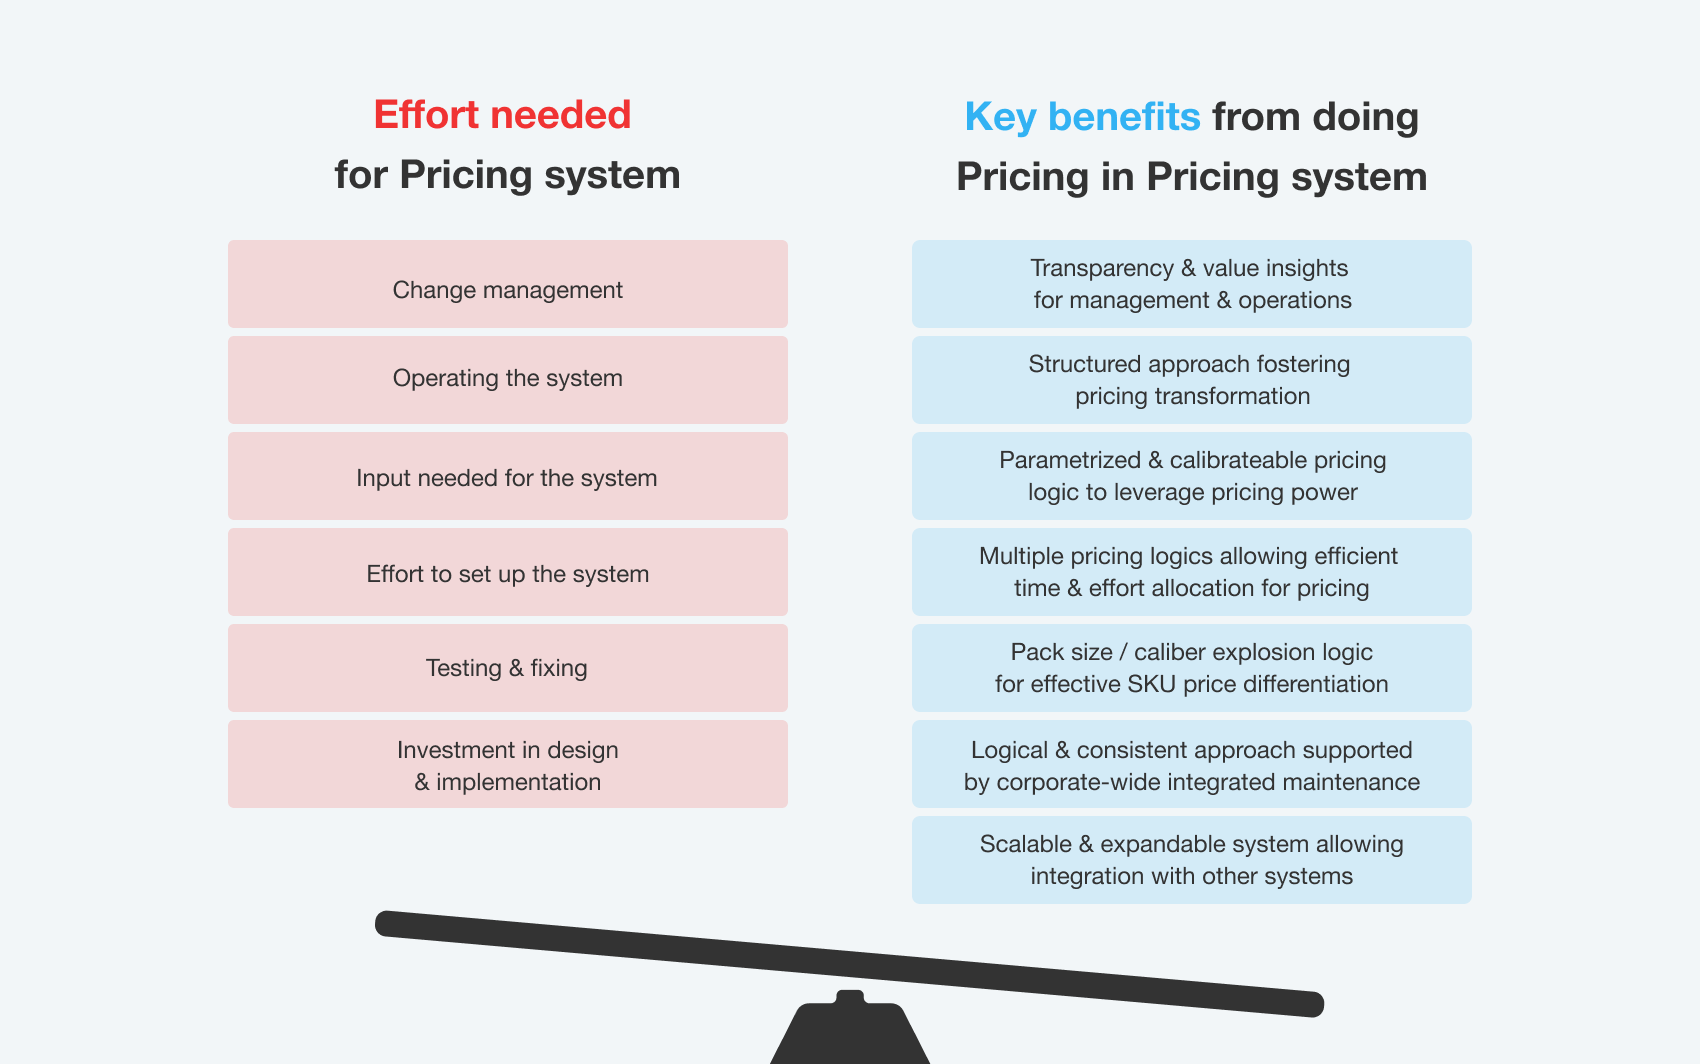 the essay i pencil illustrates that the pricing system